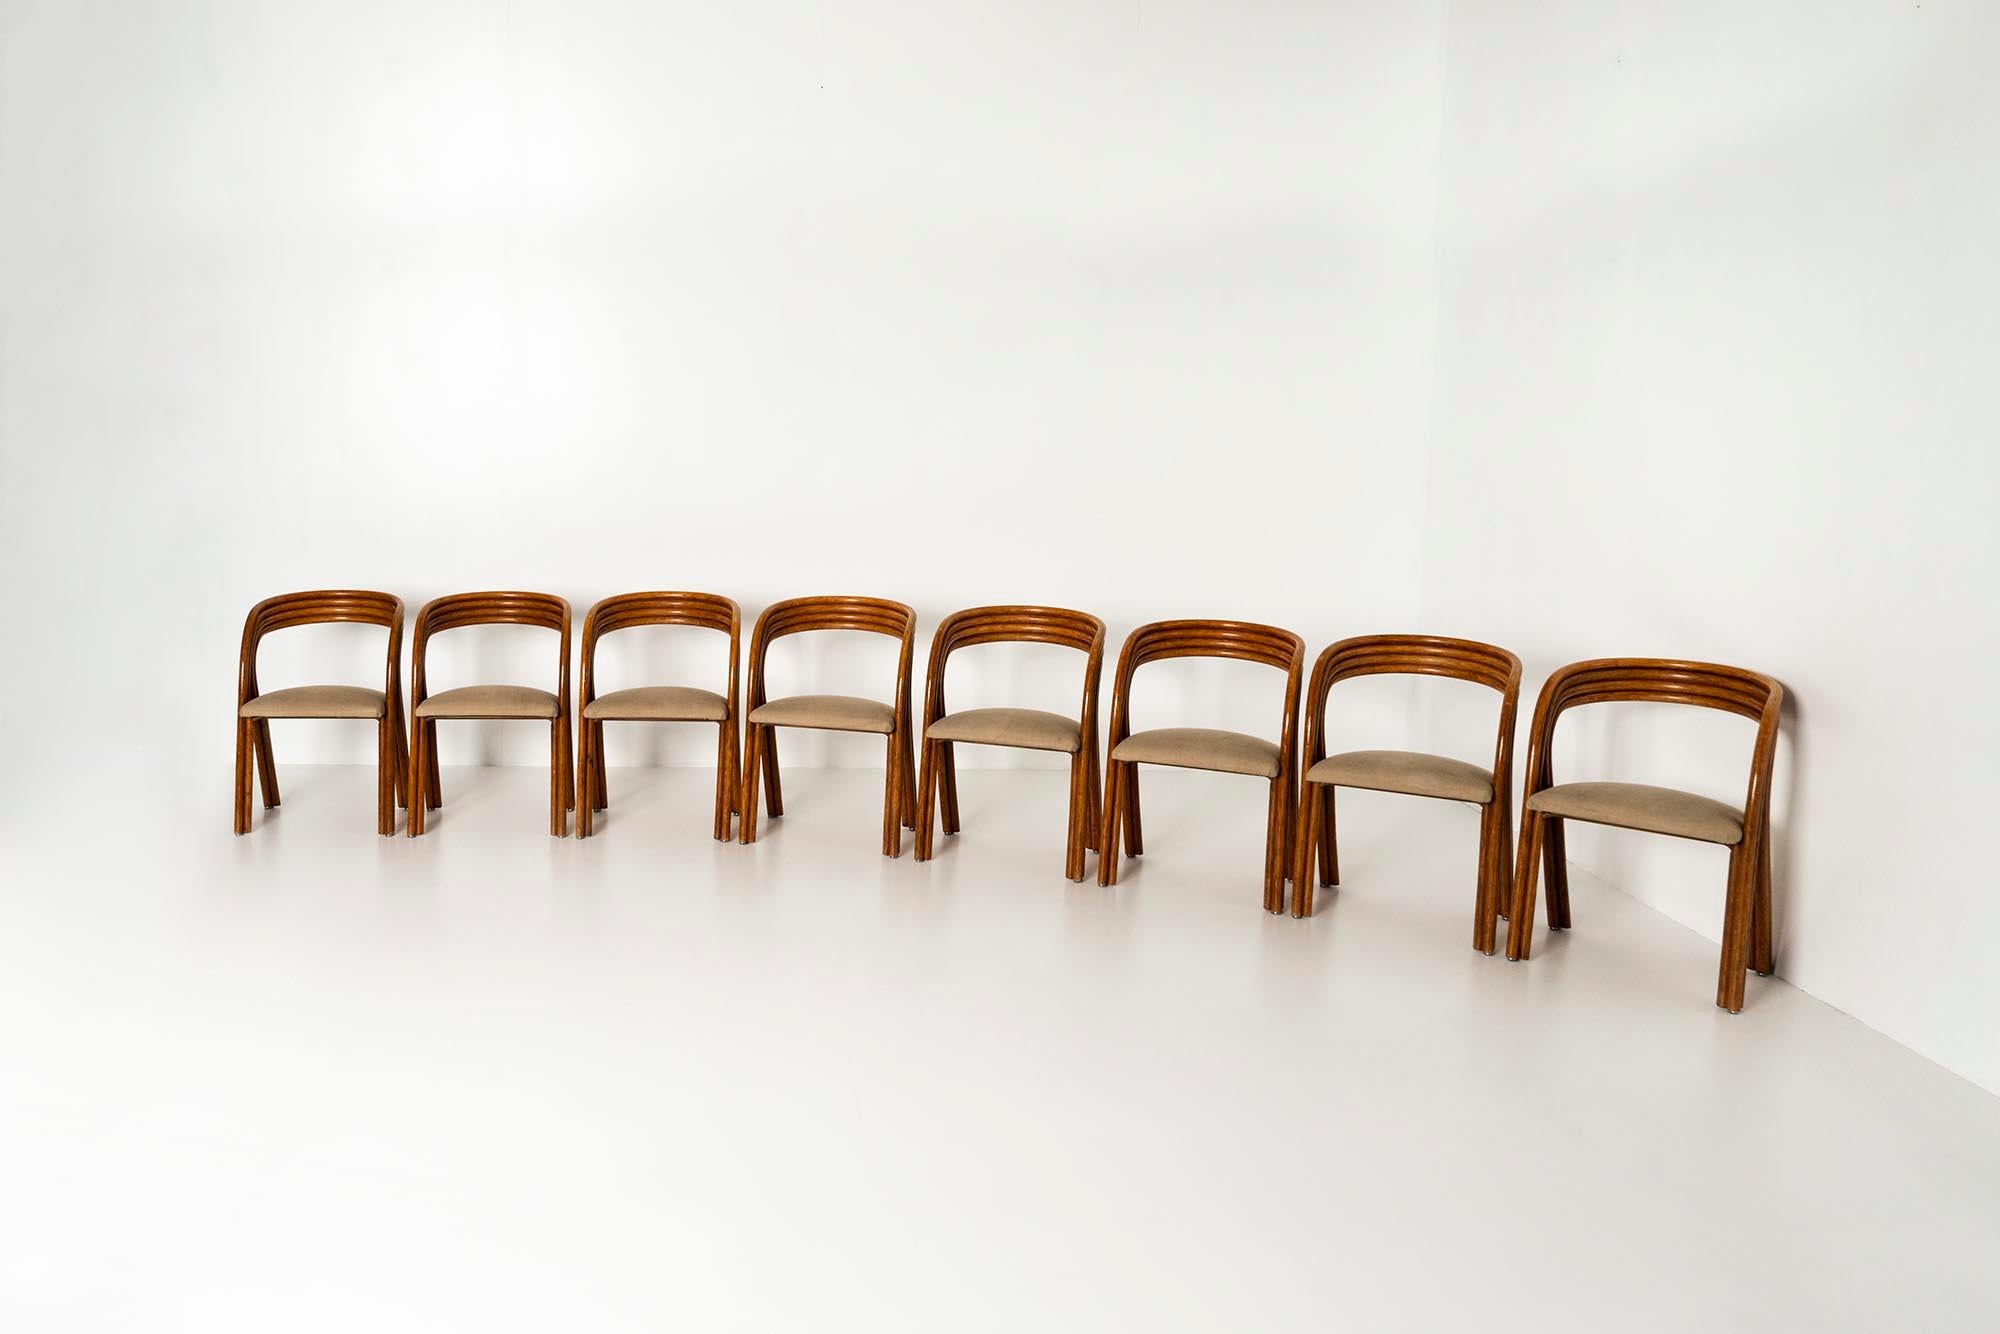 Eight very eye-catching chairs designed by the Belgian designer Axel Enthoven for Rohé Design in 1980. What is immediately striking about this multi-award winning design is the beautiful patina that the manou wood (sanded bamboo) shows. The color